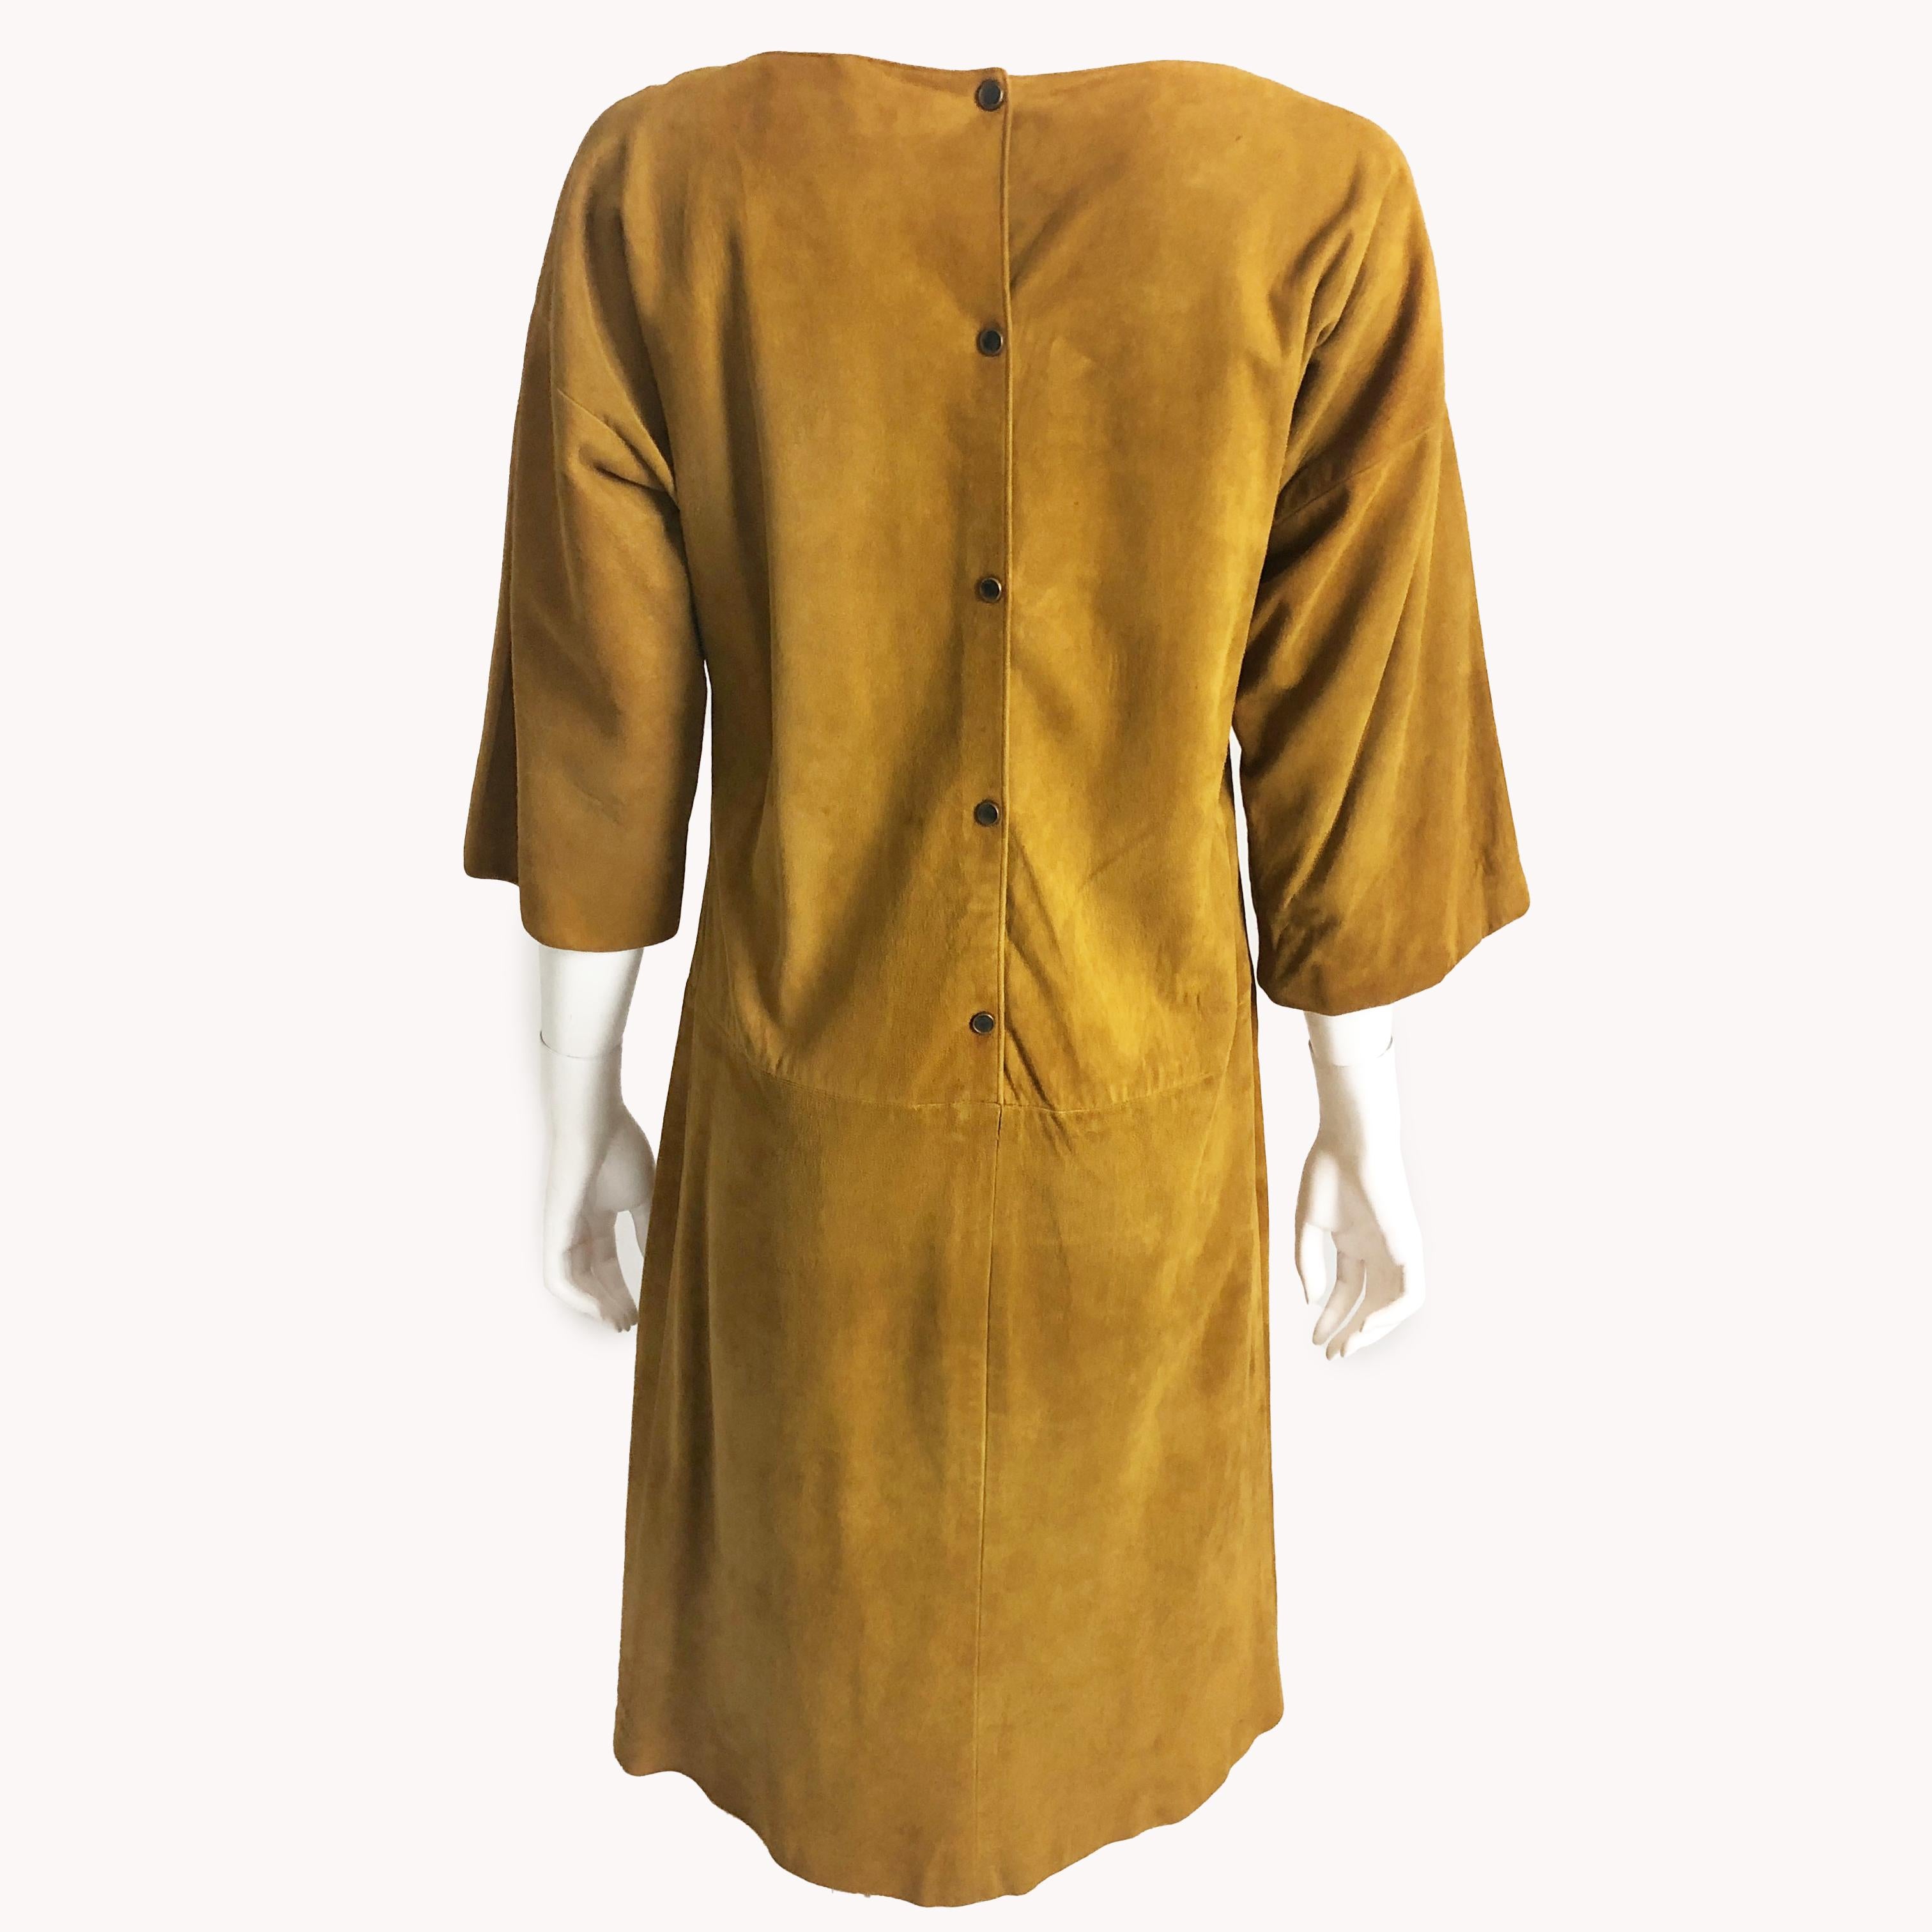 Bonnie Cashin for Sills Dress Gold Suede Leather Kimono Style Sleeves Rare 1960s For Sale 3